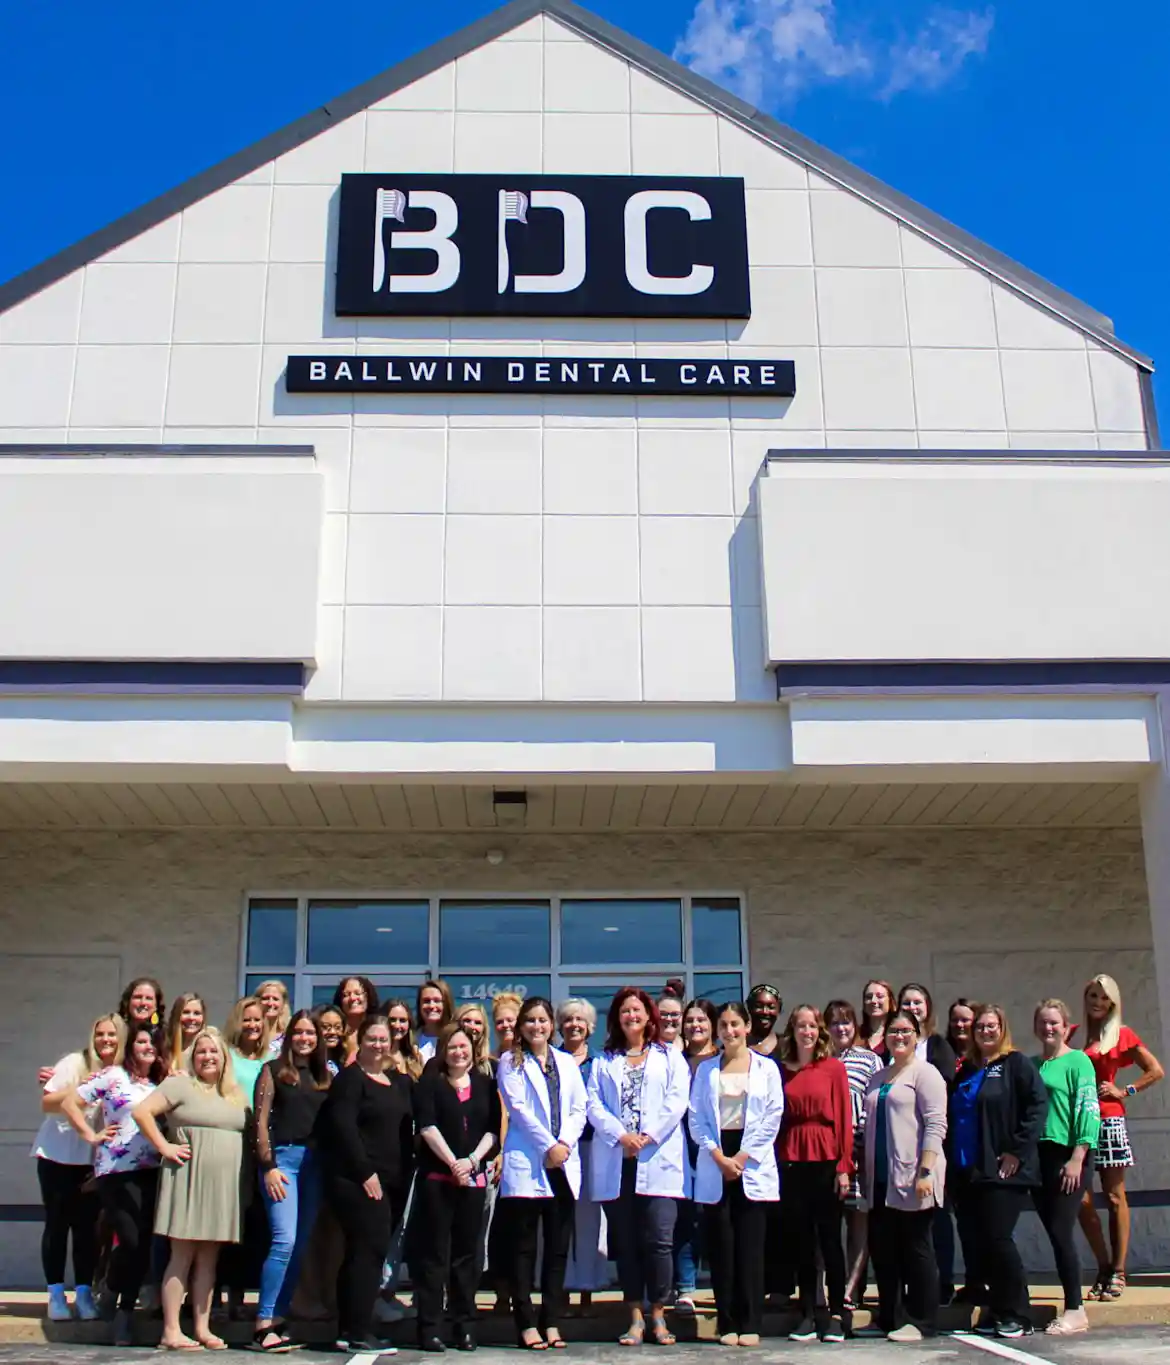 Full BDC Team Photo in front of the dental office